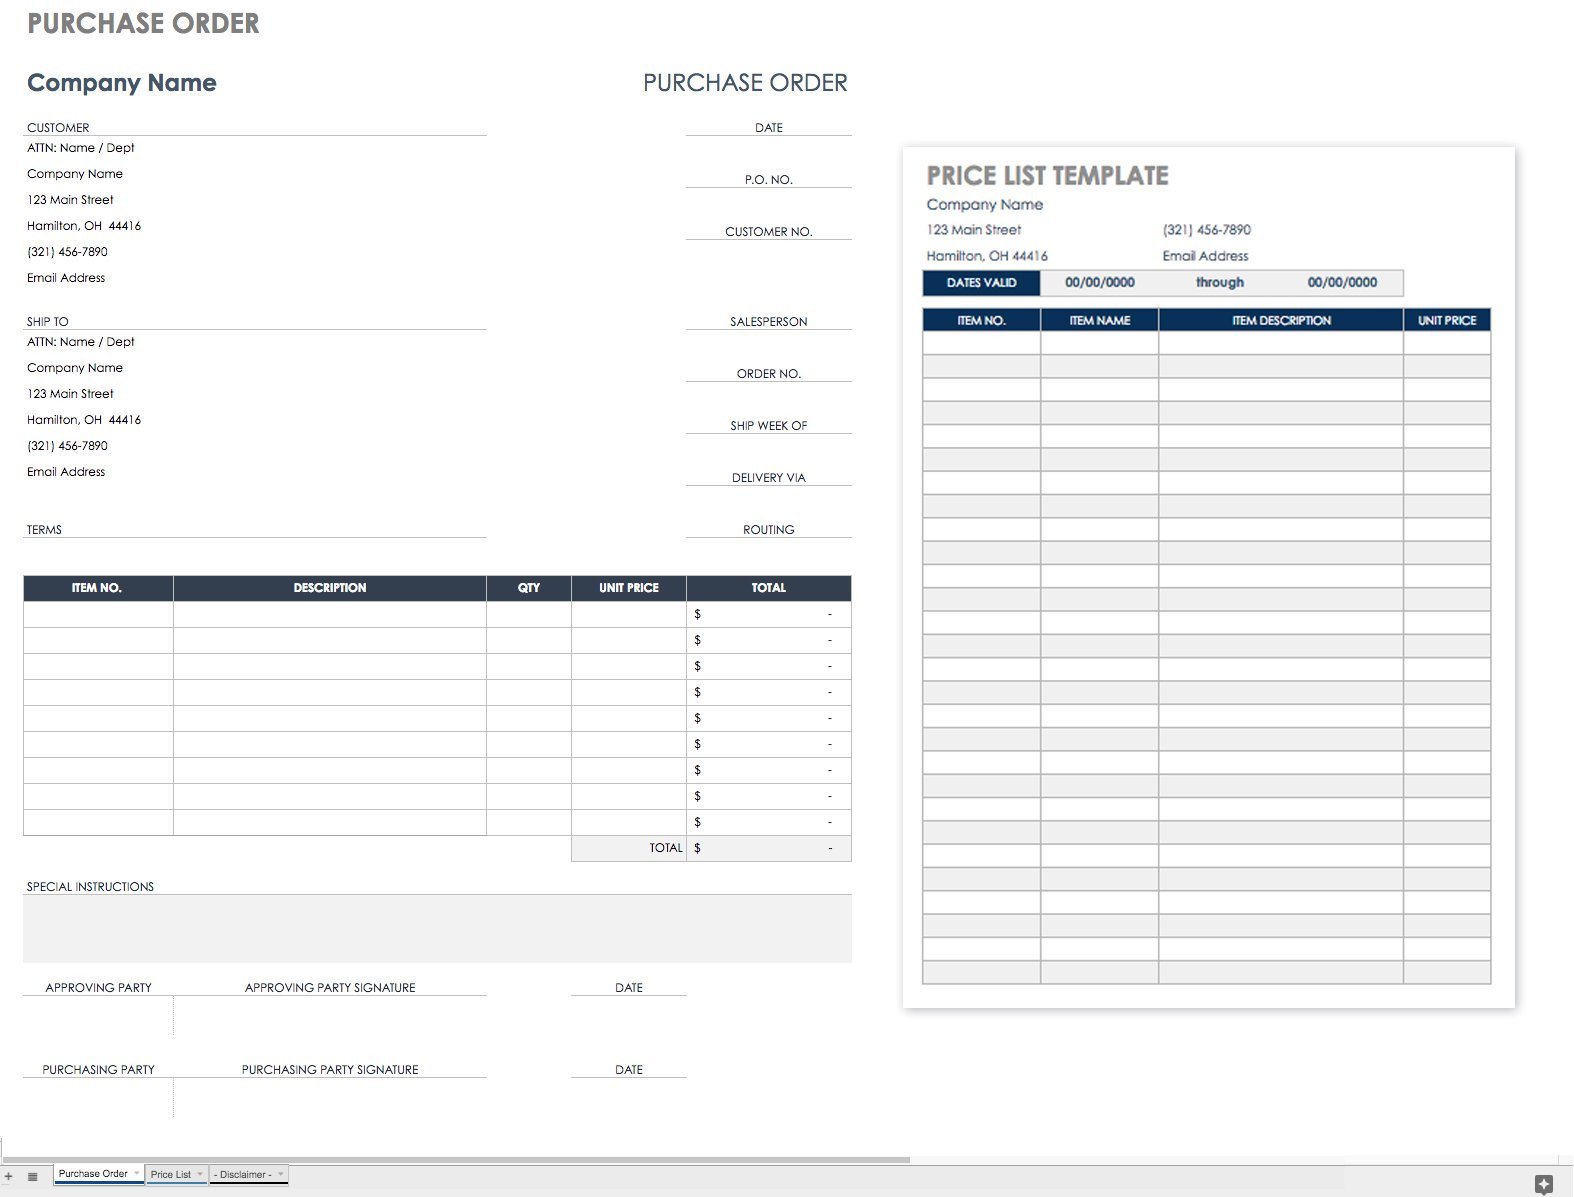 Free Purchase Order Templates